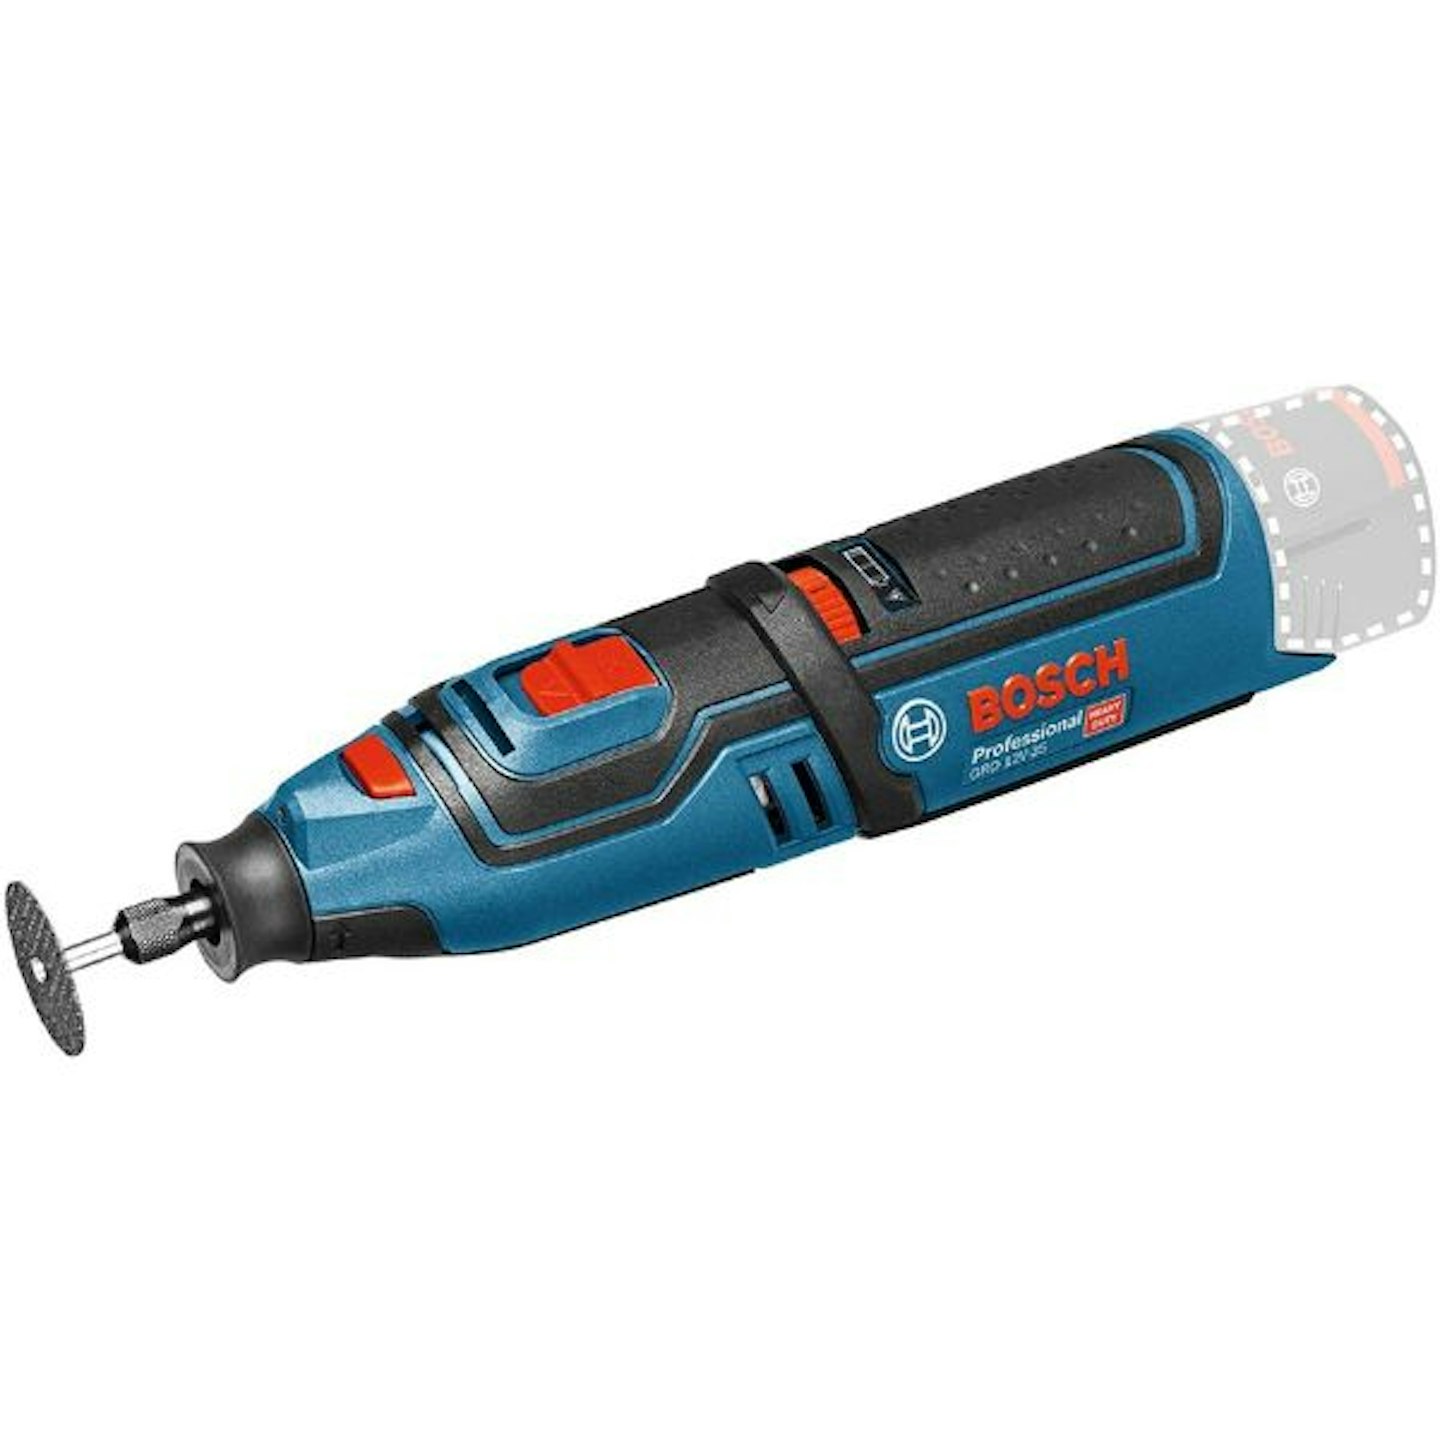 The best rotary tool for car polishing